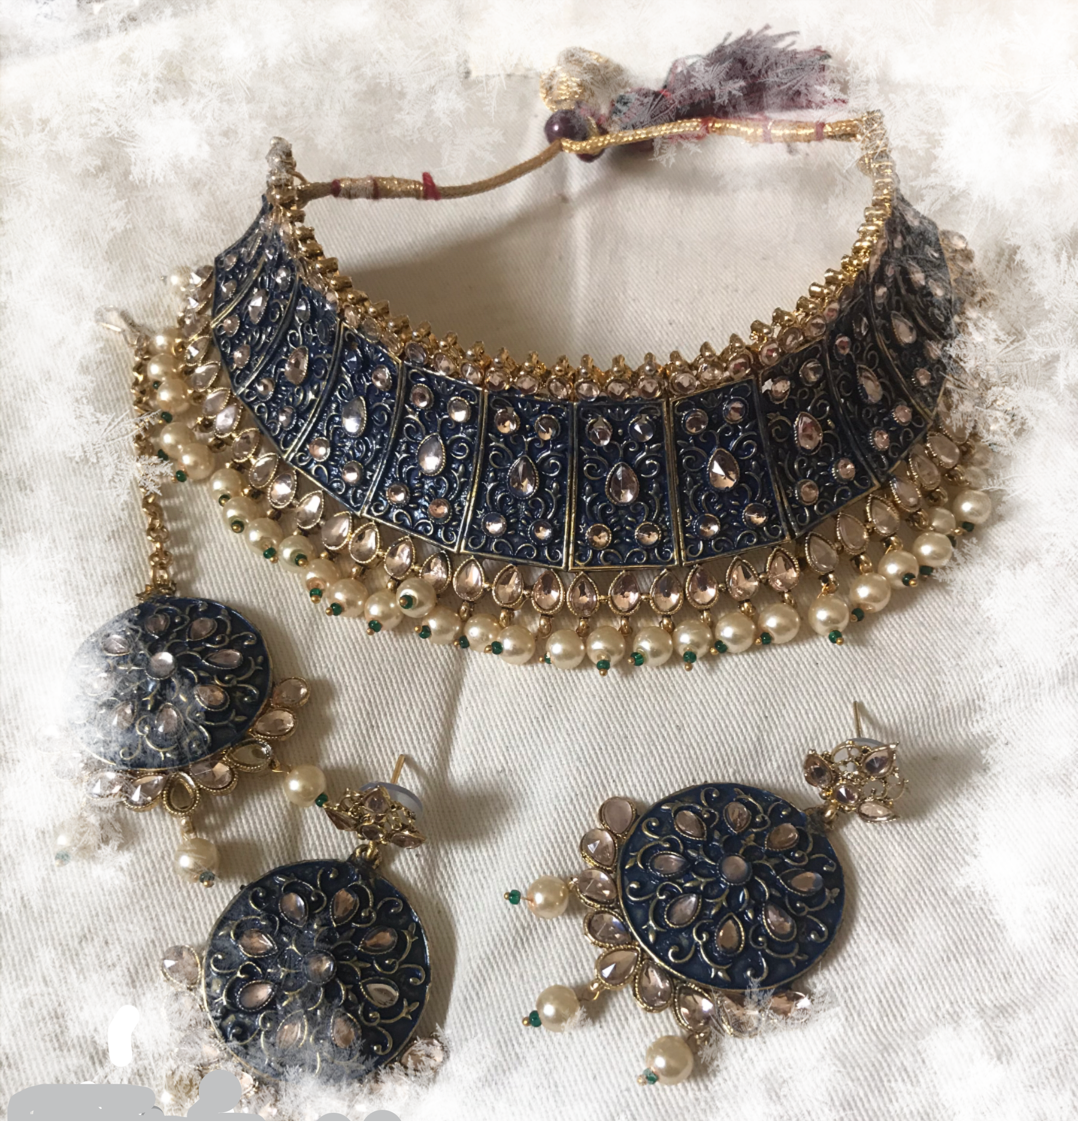 Indian bridal necklace earrings and teeka head jewelry set